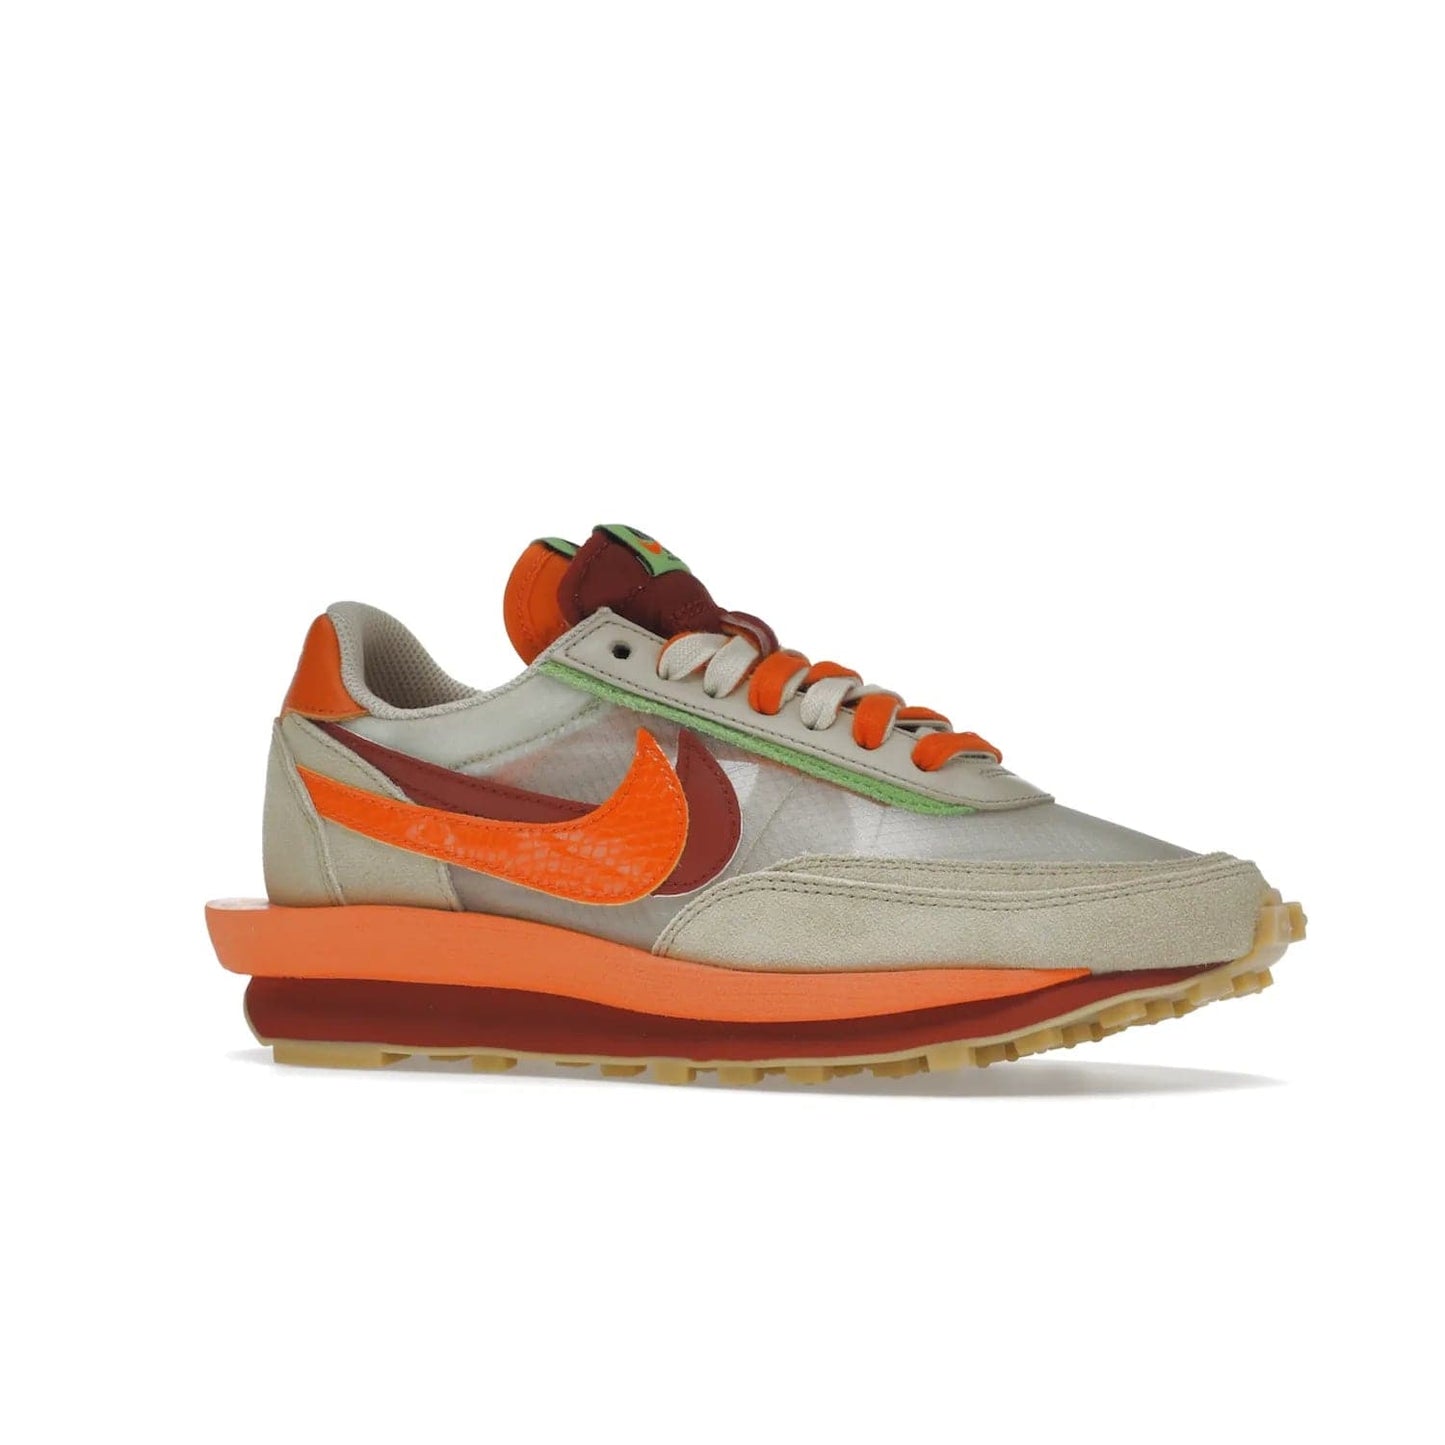 Nike LD Waffle sacai CLOT Kiss of Death Net Orange Blaze - Image 3 - Only at www.BallersClubKickz.com - A bold and stylish Nike LD Waffle sacai CLOT Kiss of Death Net Orange Blaze sneaker featuring a unique off-white, Deep Red & Orange Blaze Swooshes, two-toned stacked sole and doubled tongue. Available in September 2021. Make a statement.